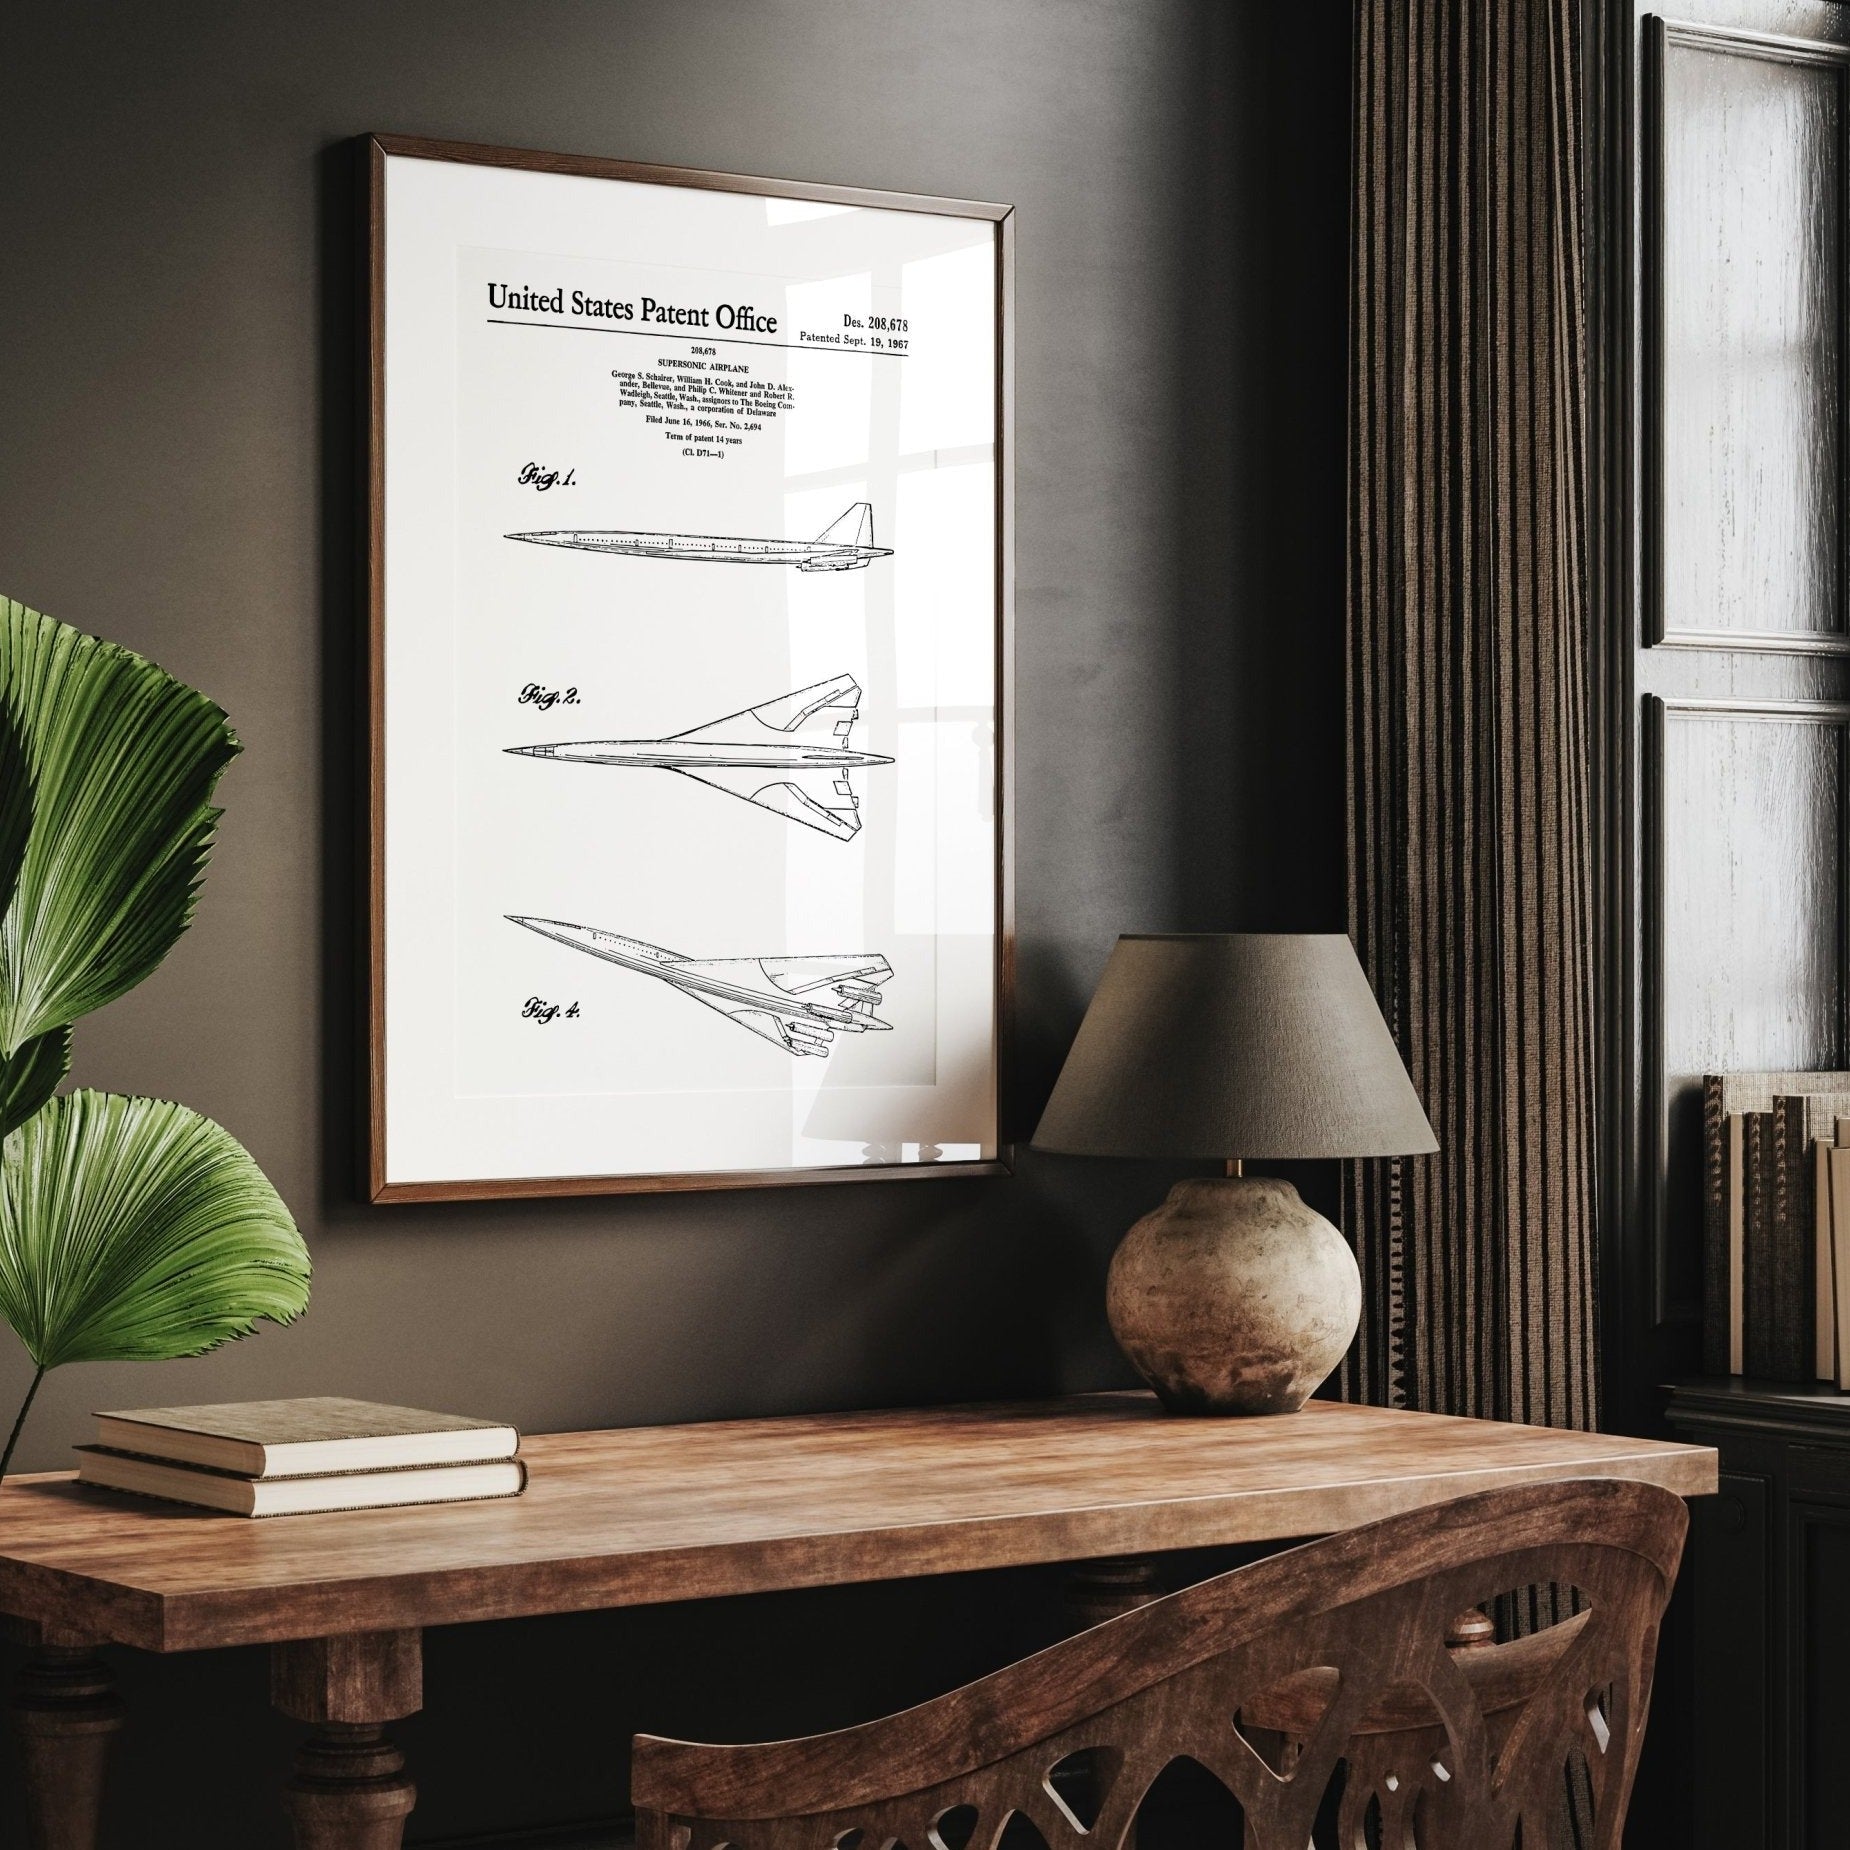 Boeing Supersonic Airplane 1967 Patent Print - Magic Posters